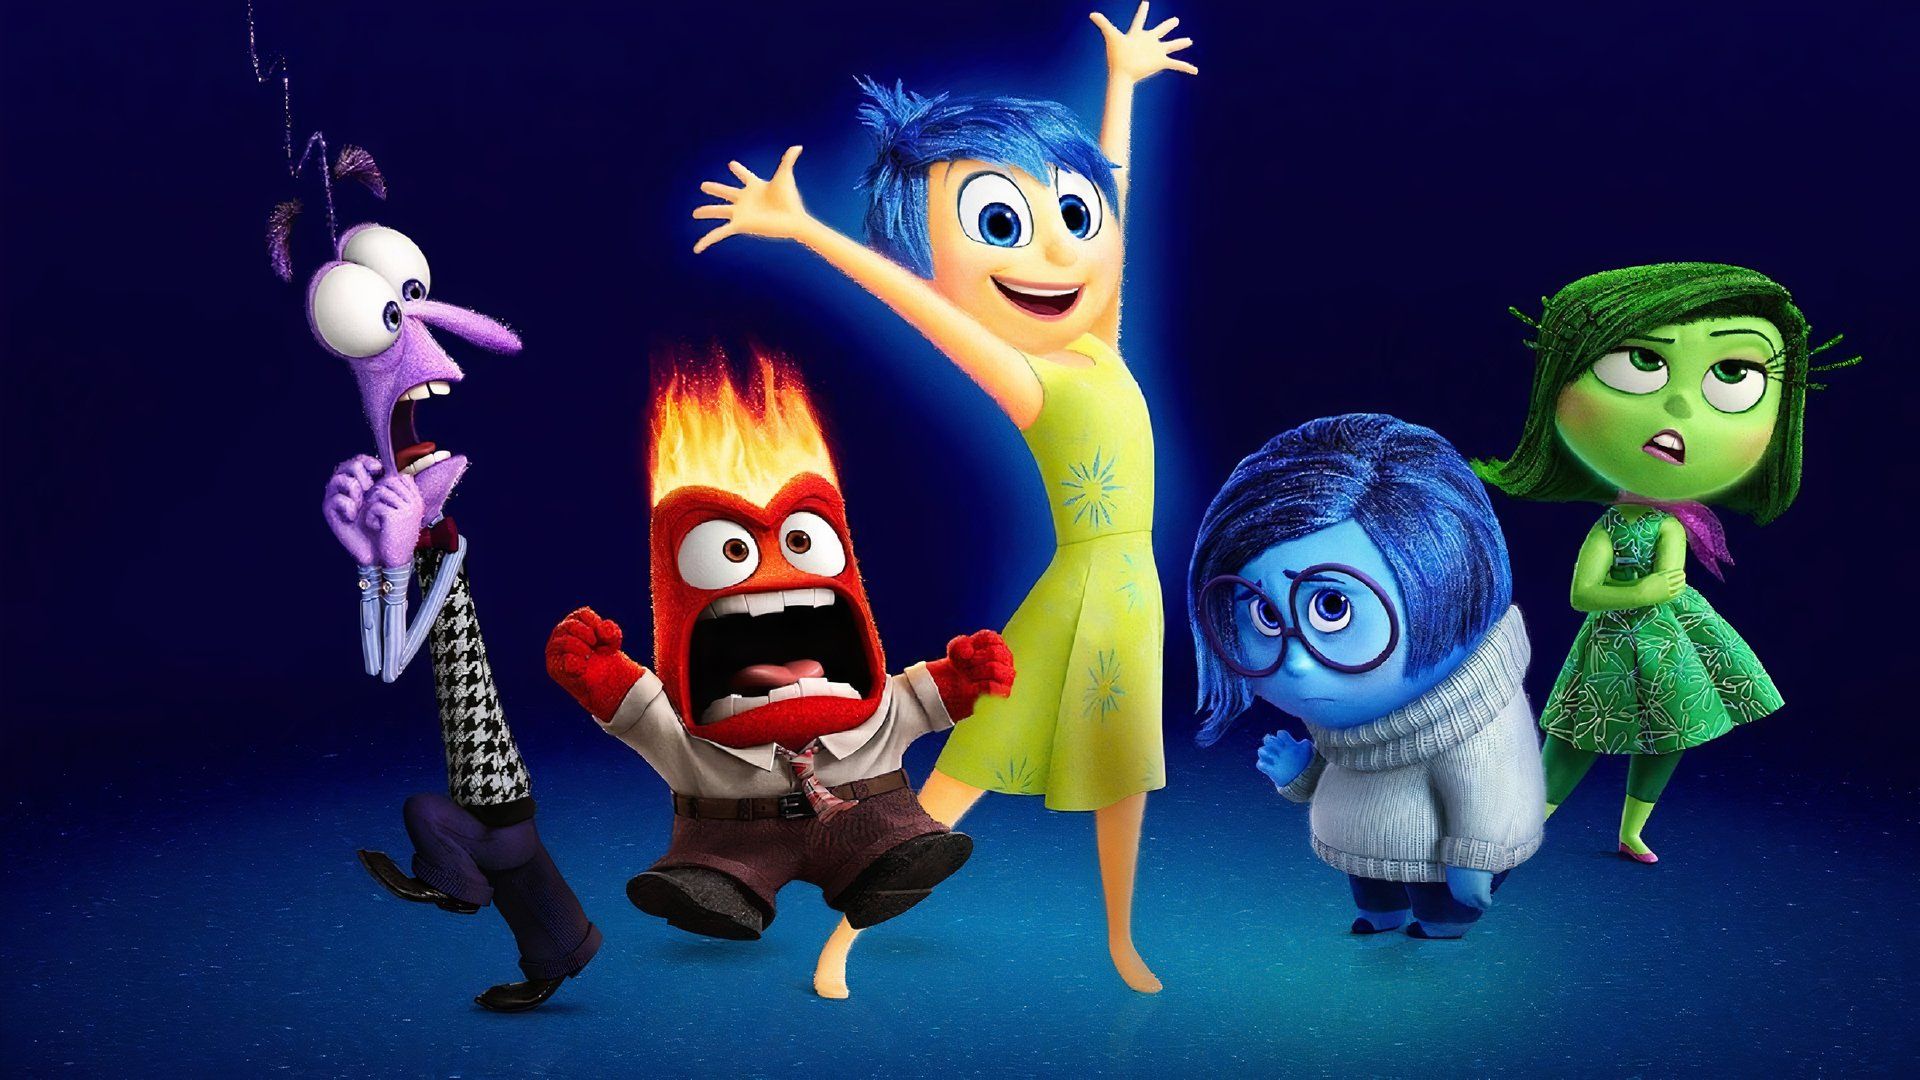 The cast of emotions in Inside Out 2 with Sadness, Anger, Joy, Fear, and Disgust